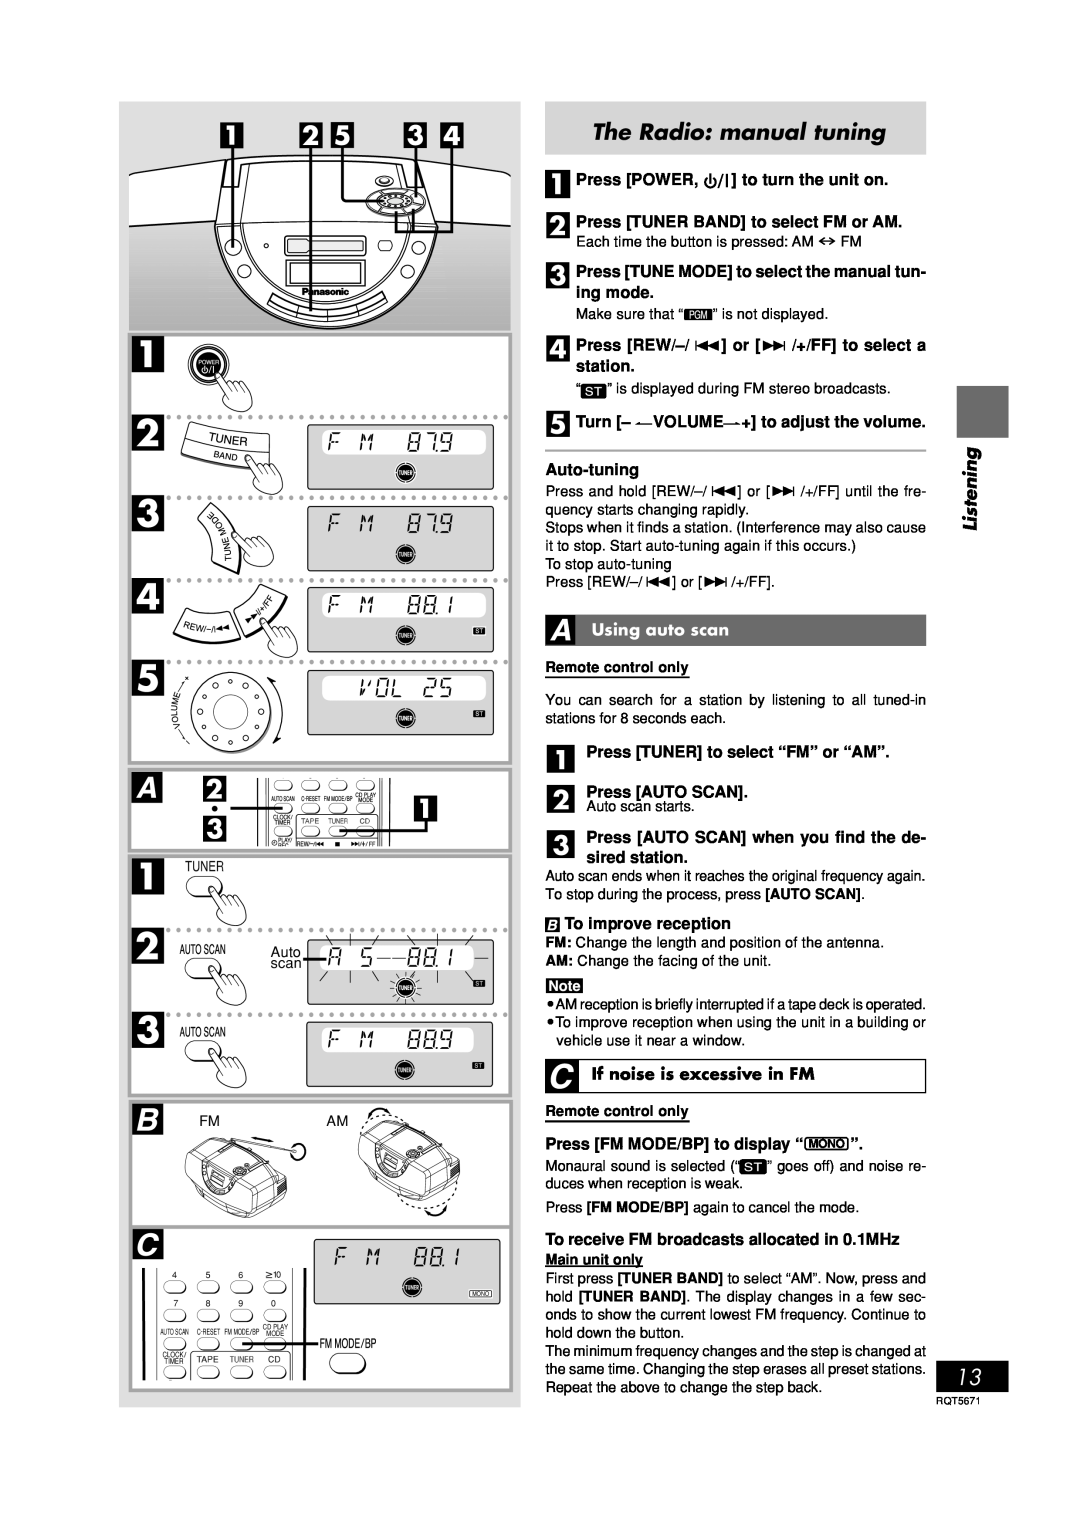 Panasonic RX-EX1 The Radio manual tuning, Press TUNER BAND to select FM or AM, Press REW/-/ or /+/FF to select a station 